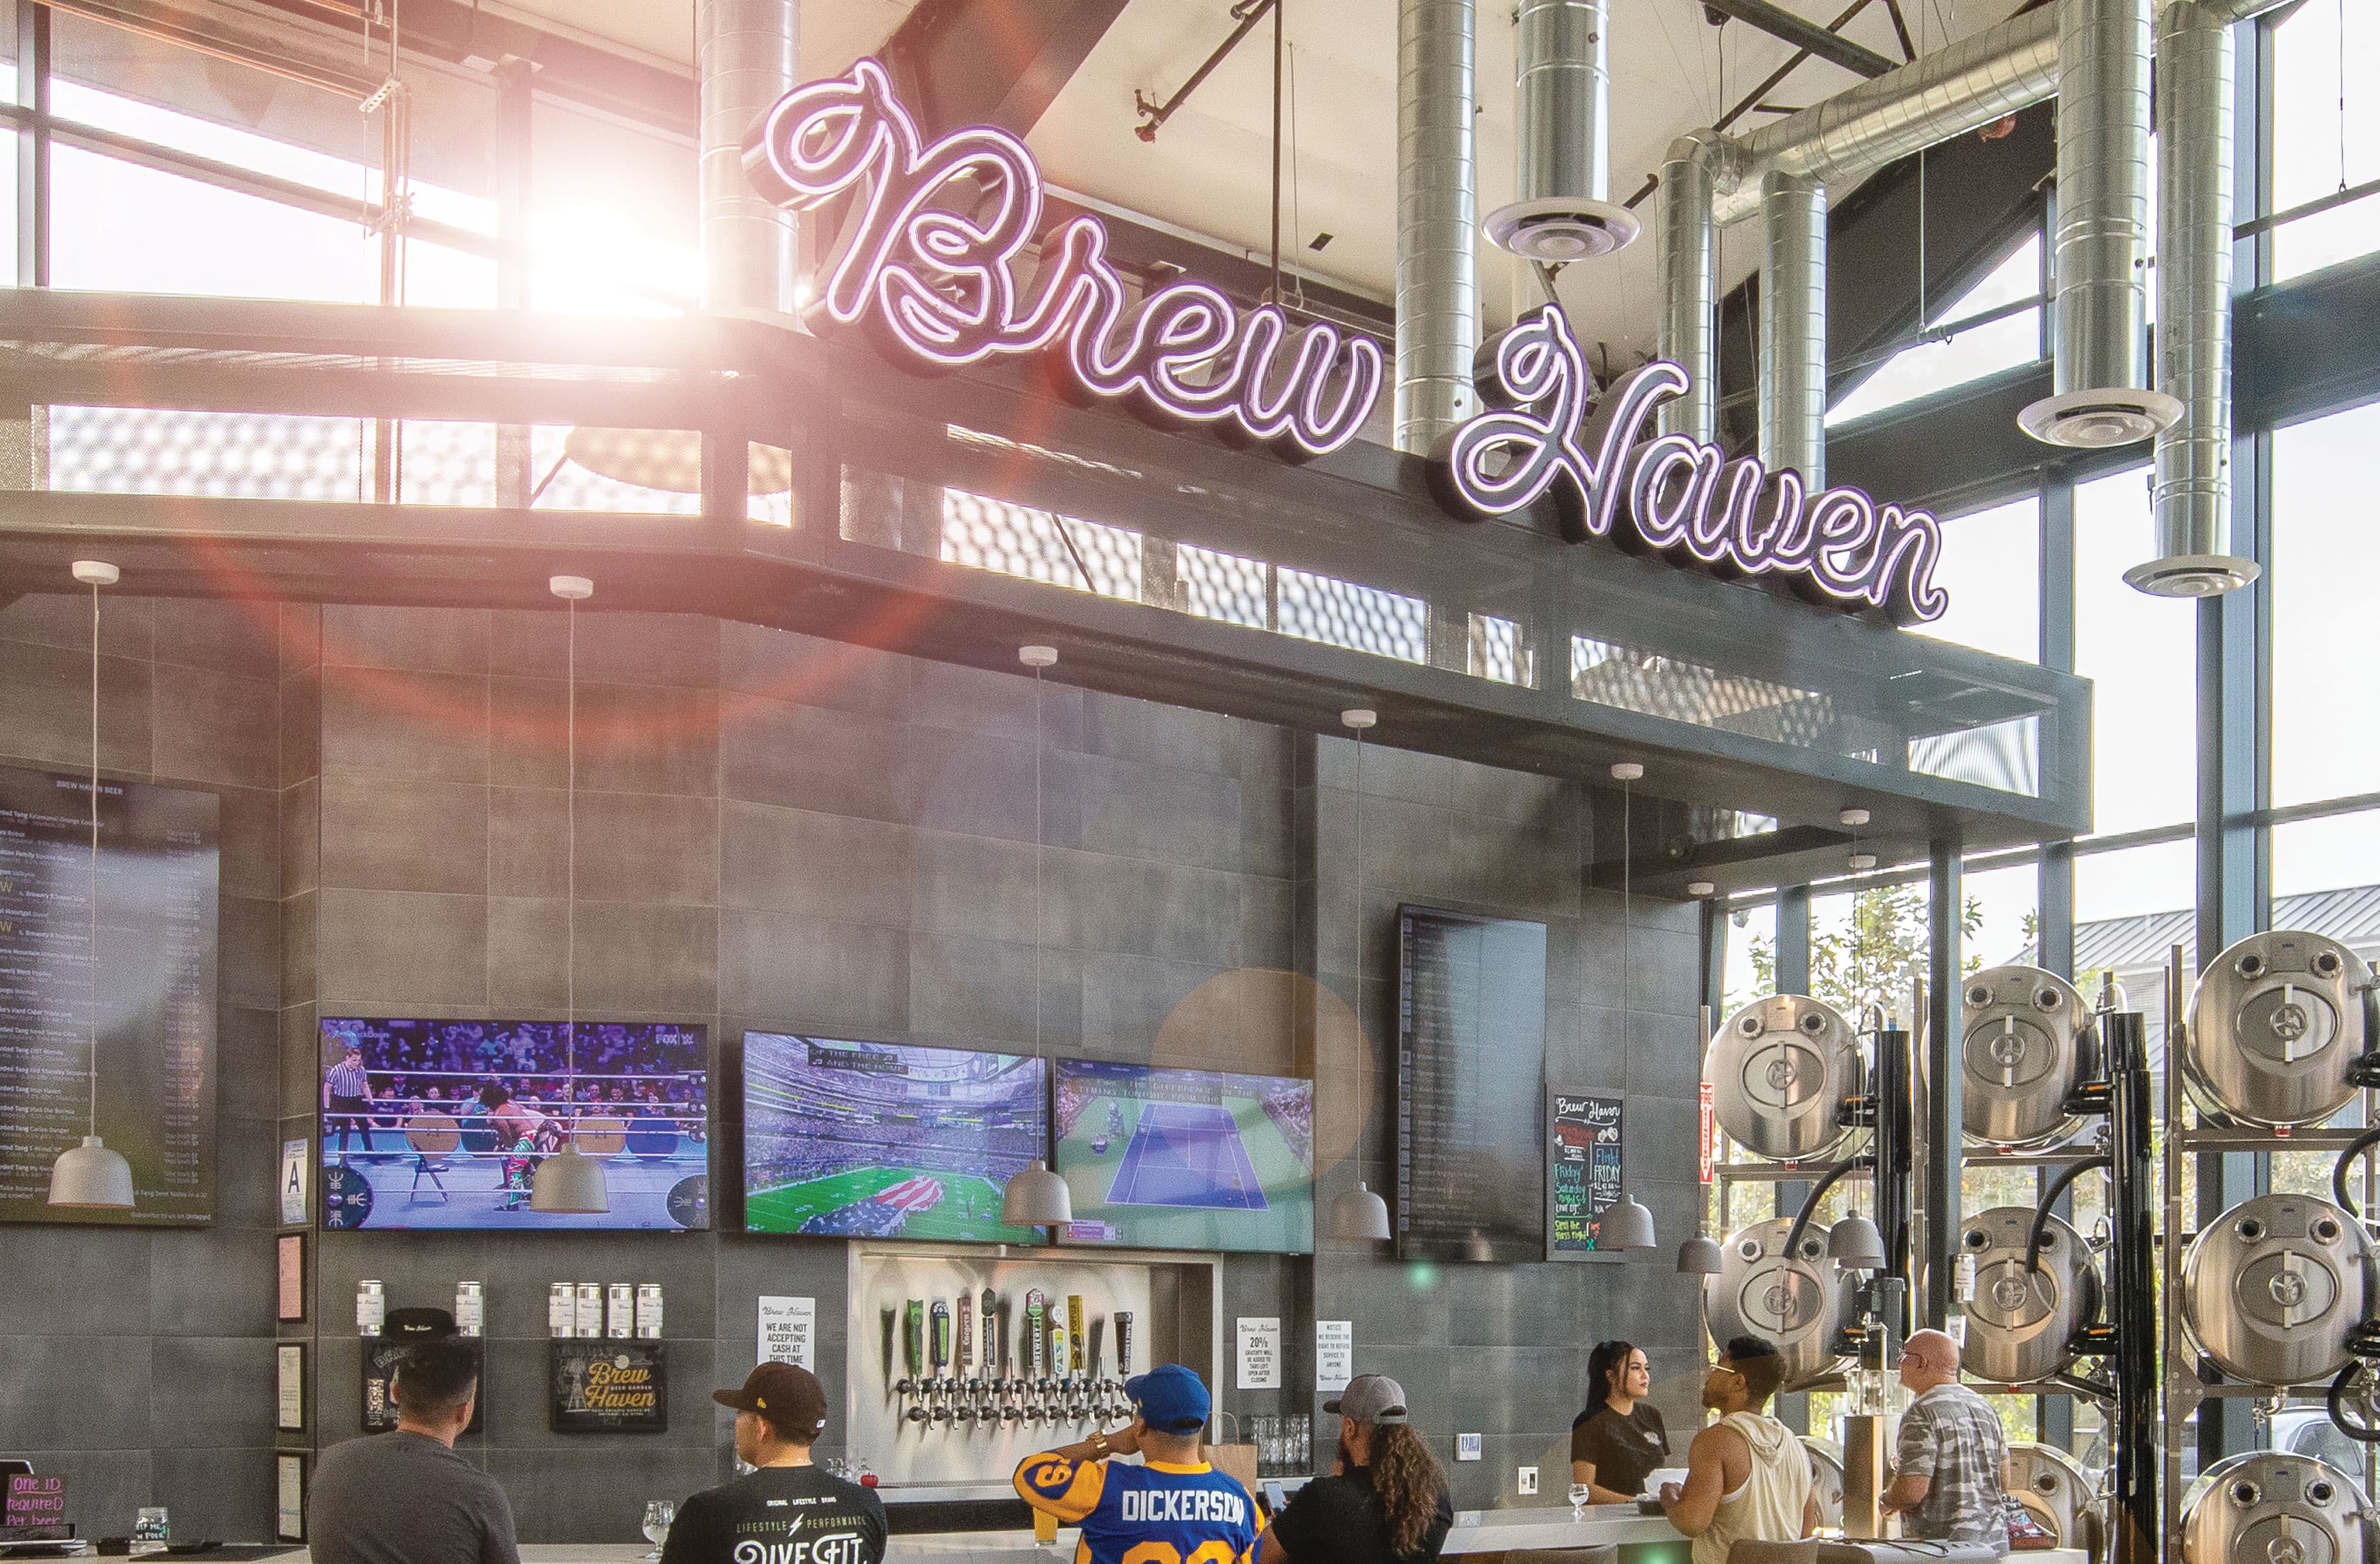 Interior neon overhead signage in cursive font for Brew Haven in New Haven Marketplace in Ontario, California. Food and beverage overhead neon signage. 